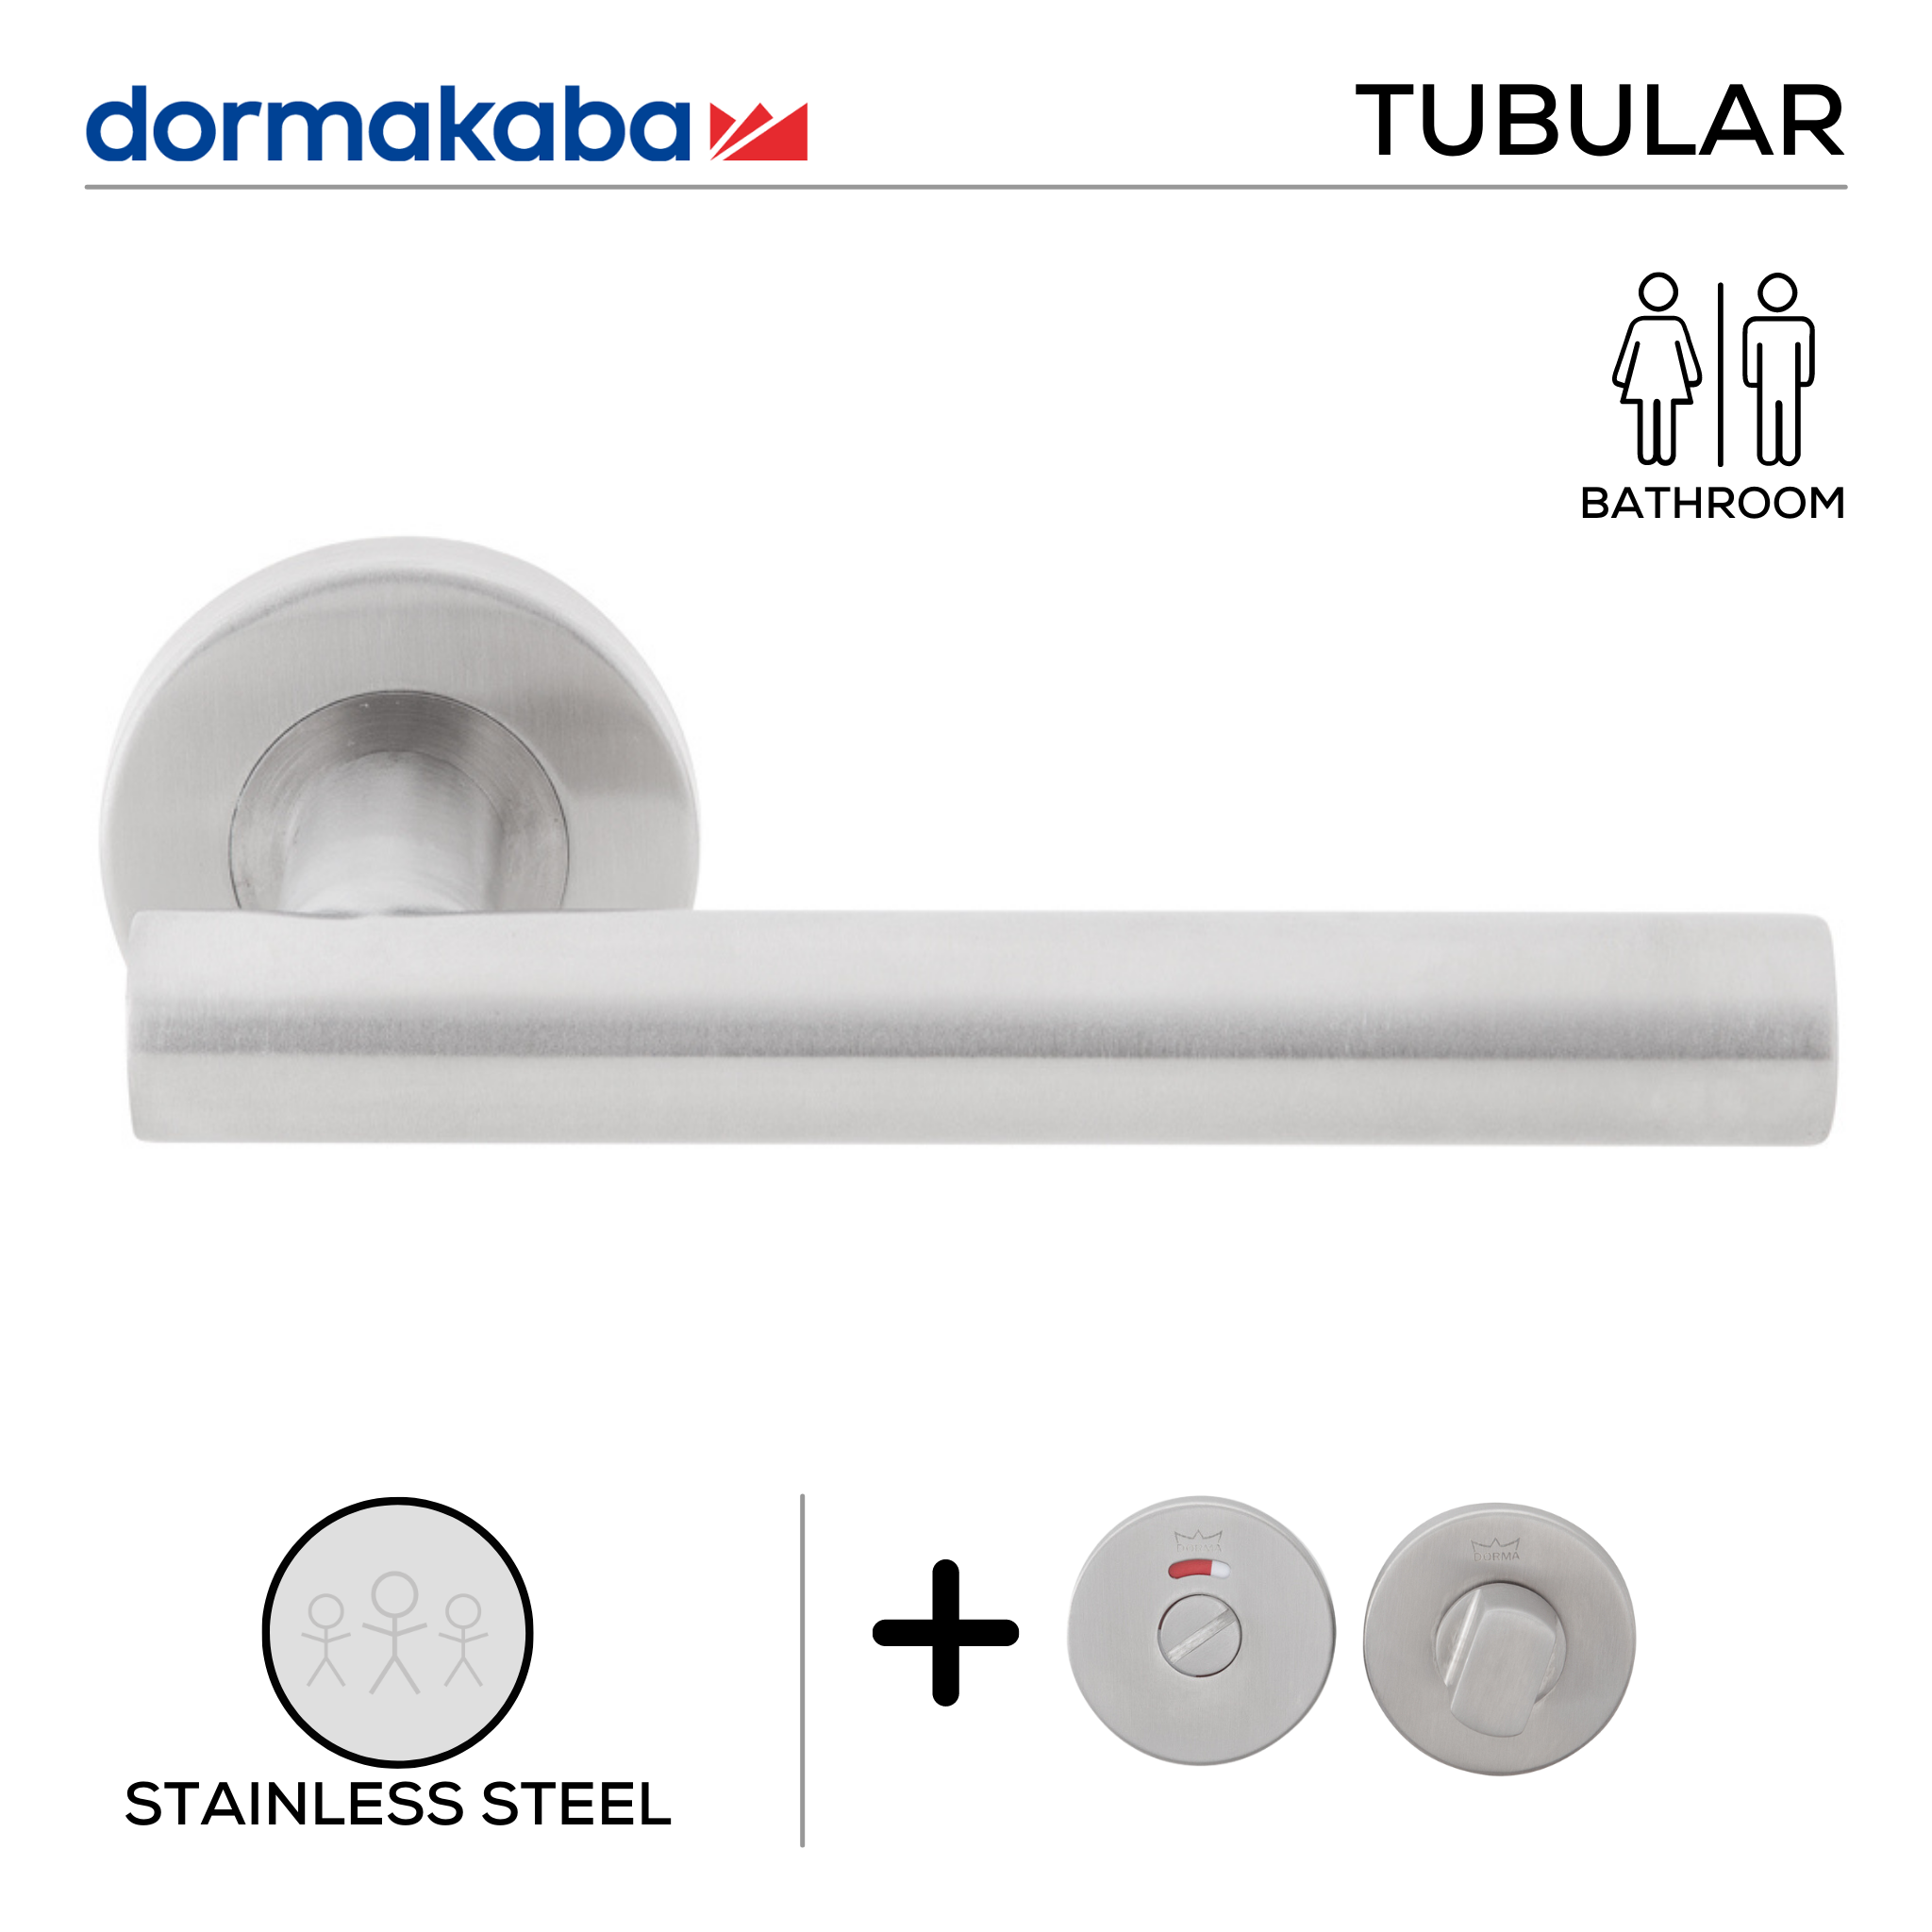 TH 124 Bathroom W/C, Lever Handles, Tubular, On Round Rose, With Bathroom (WC) Indicator Set - DWC 005, 137mm (l), Stainless Steel, DORMAKABA